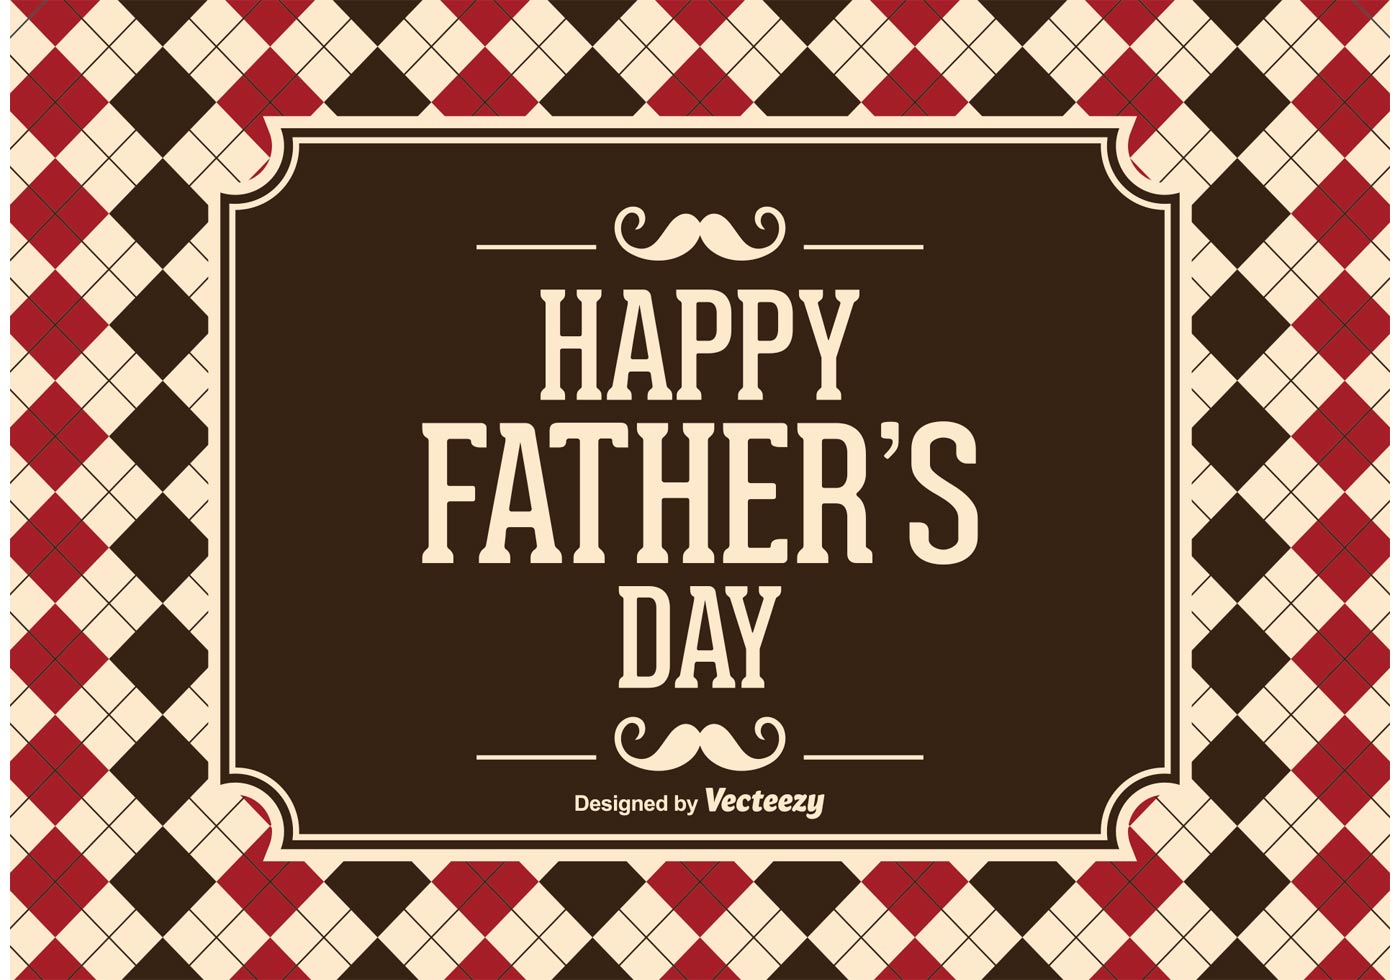 Download Father's Day Vector Illustration - Download Free Vector ...